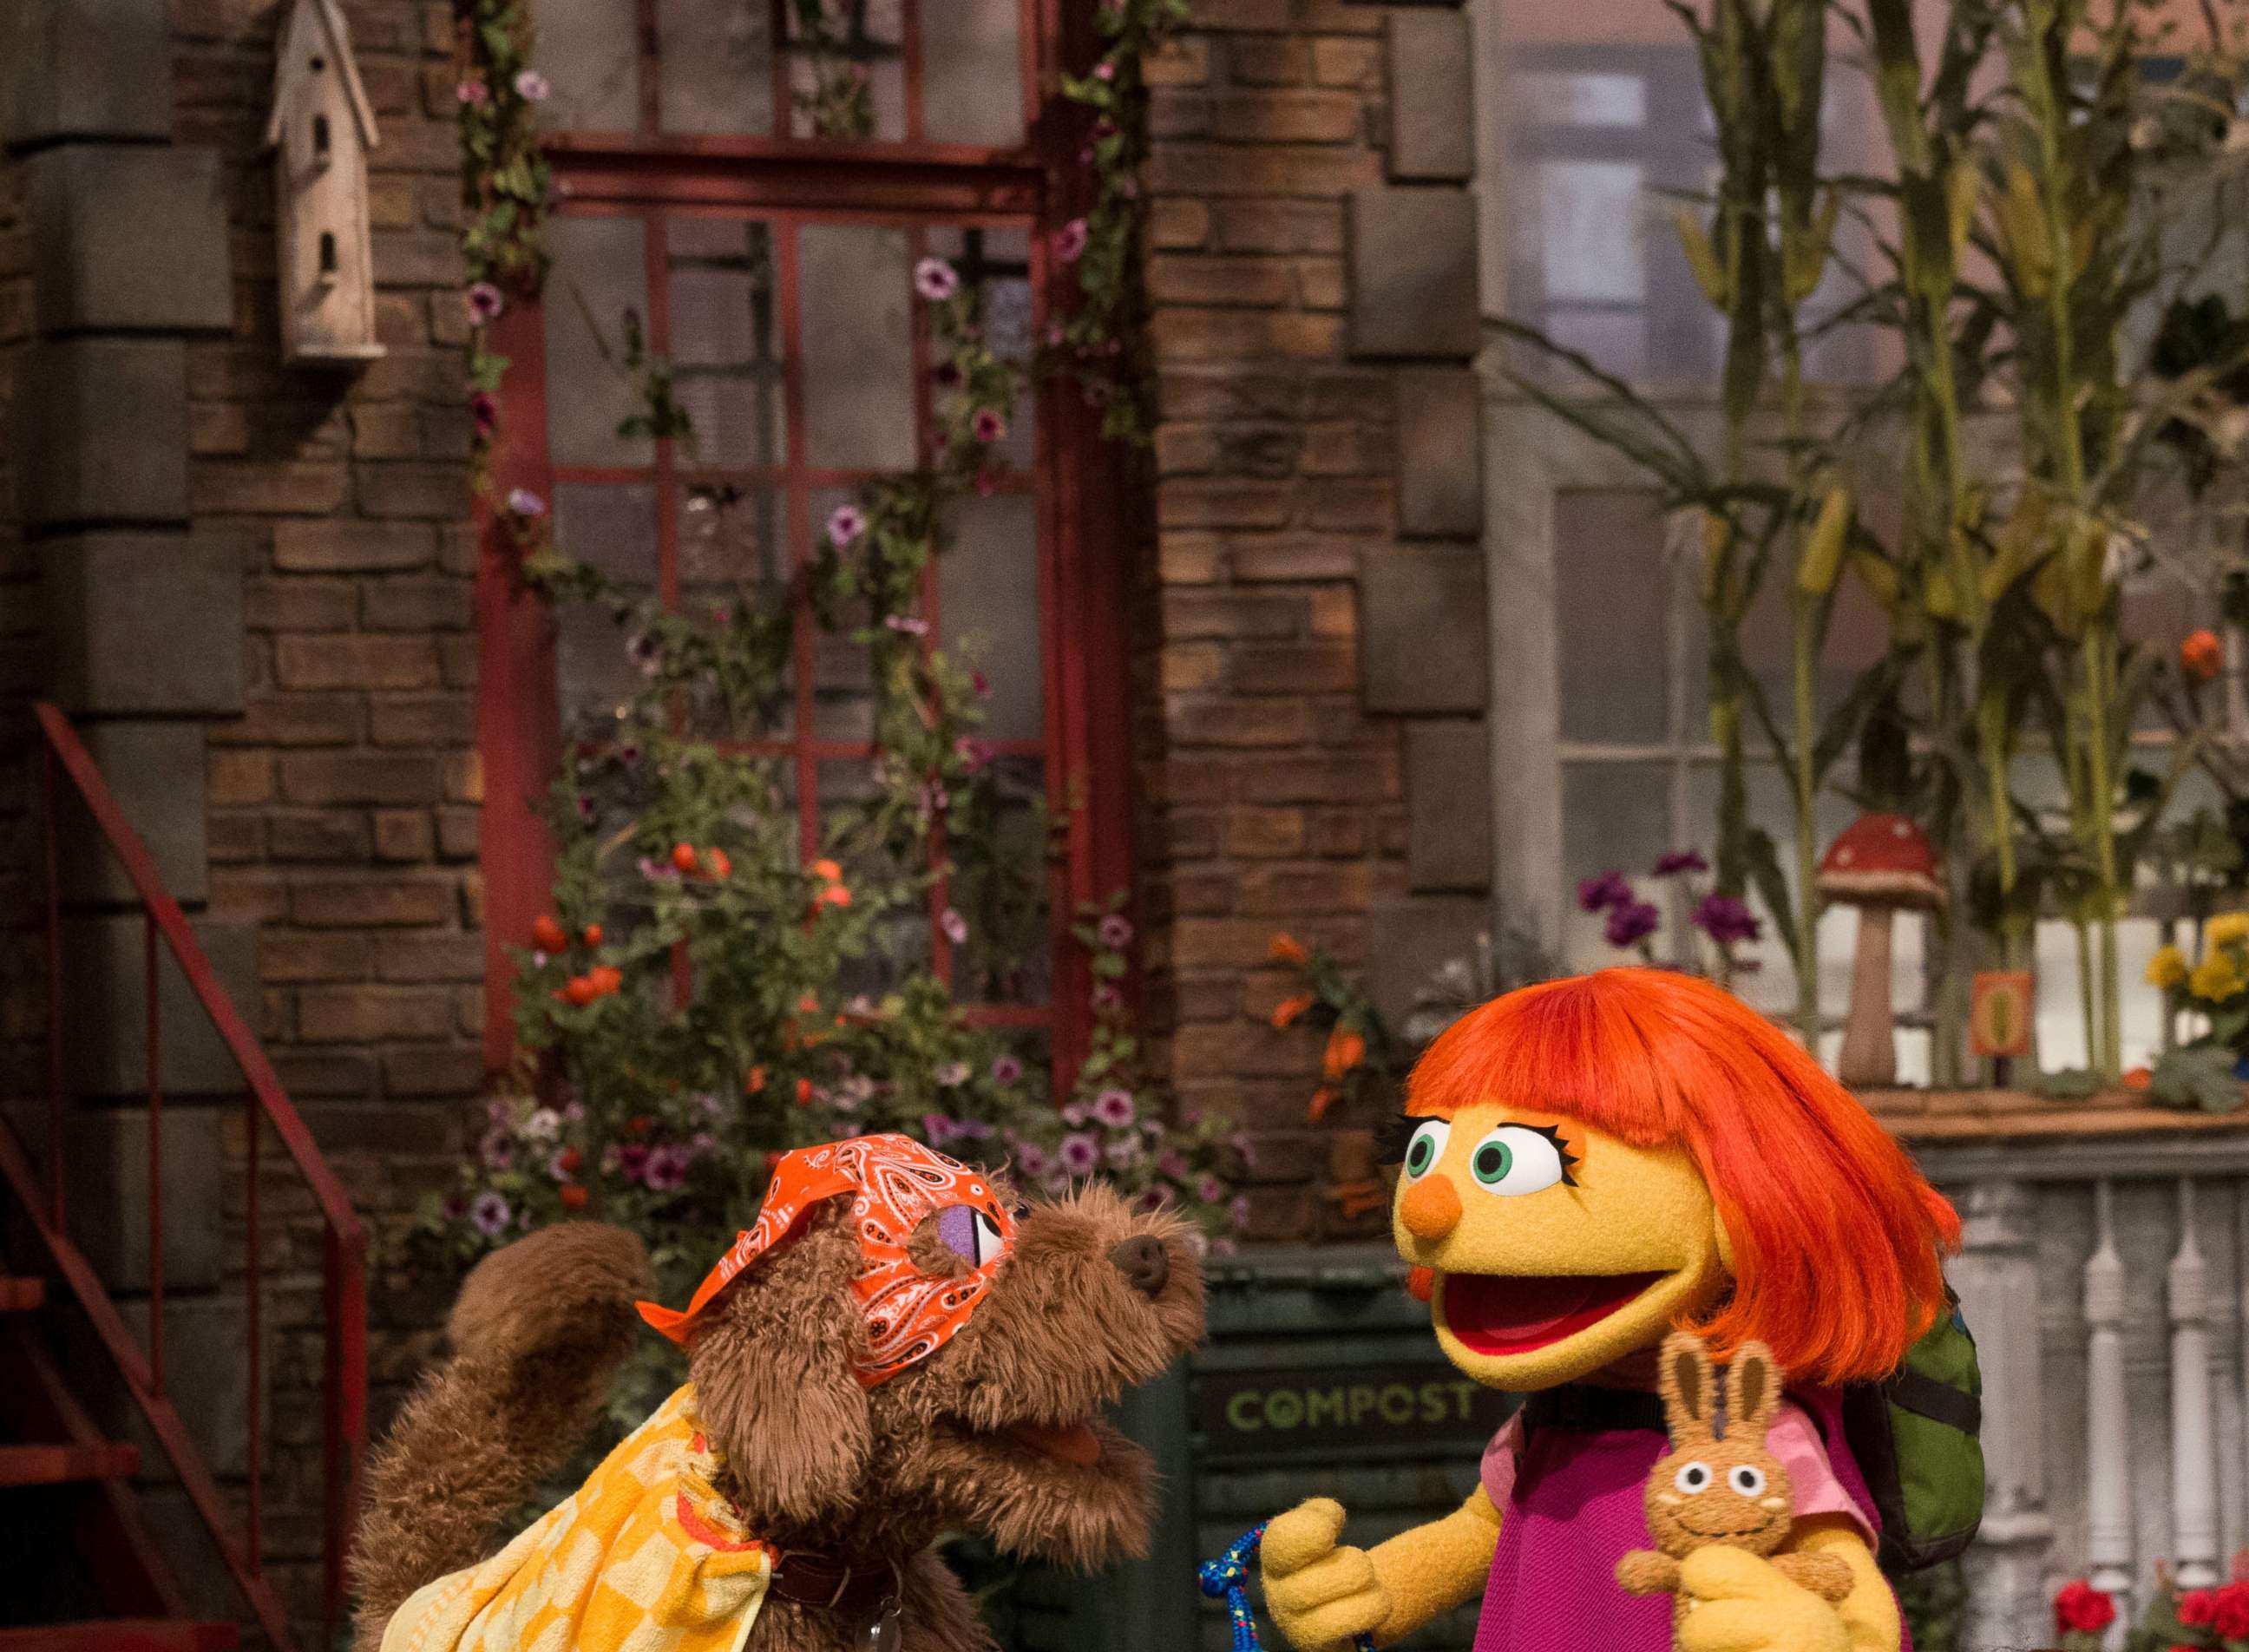 PHOTO: "Sesame Street" is highlighting how all children are amazing with new resources for families, and brand new content featuring Julia. Julia was the first Muppet with autism to appear on the show in 2017.